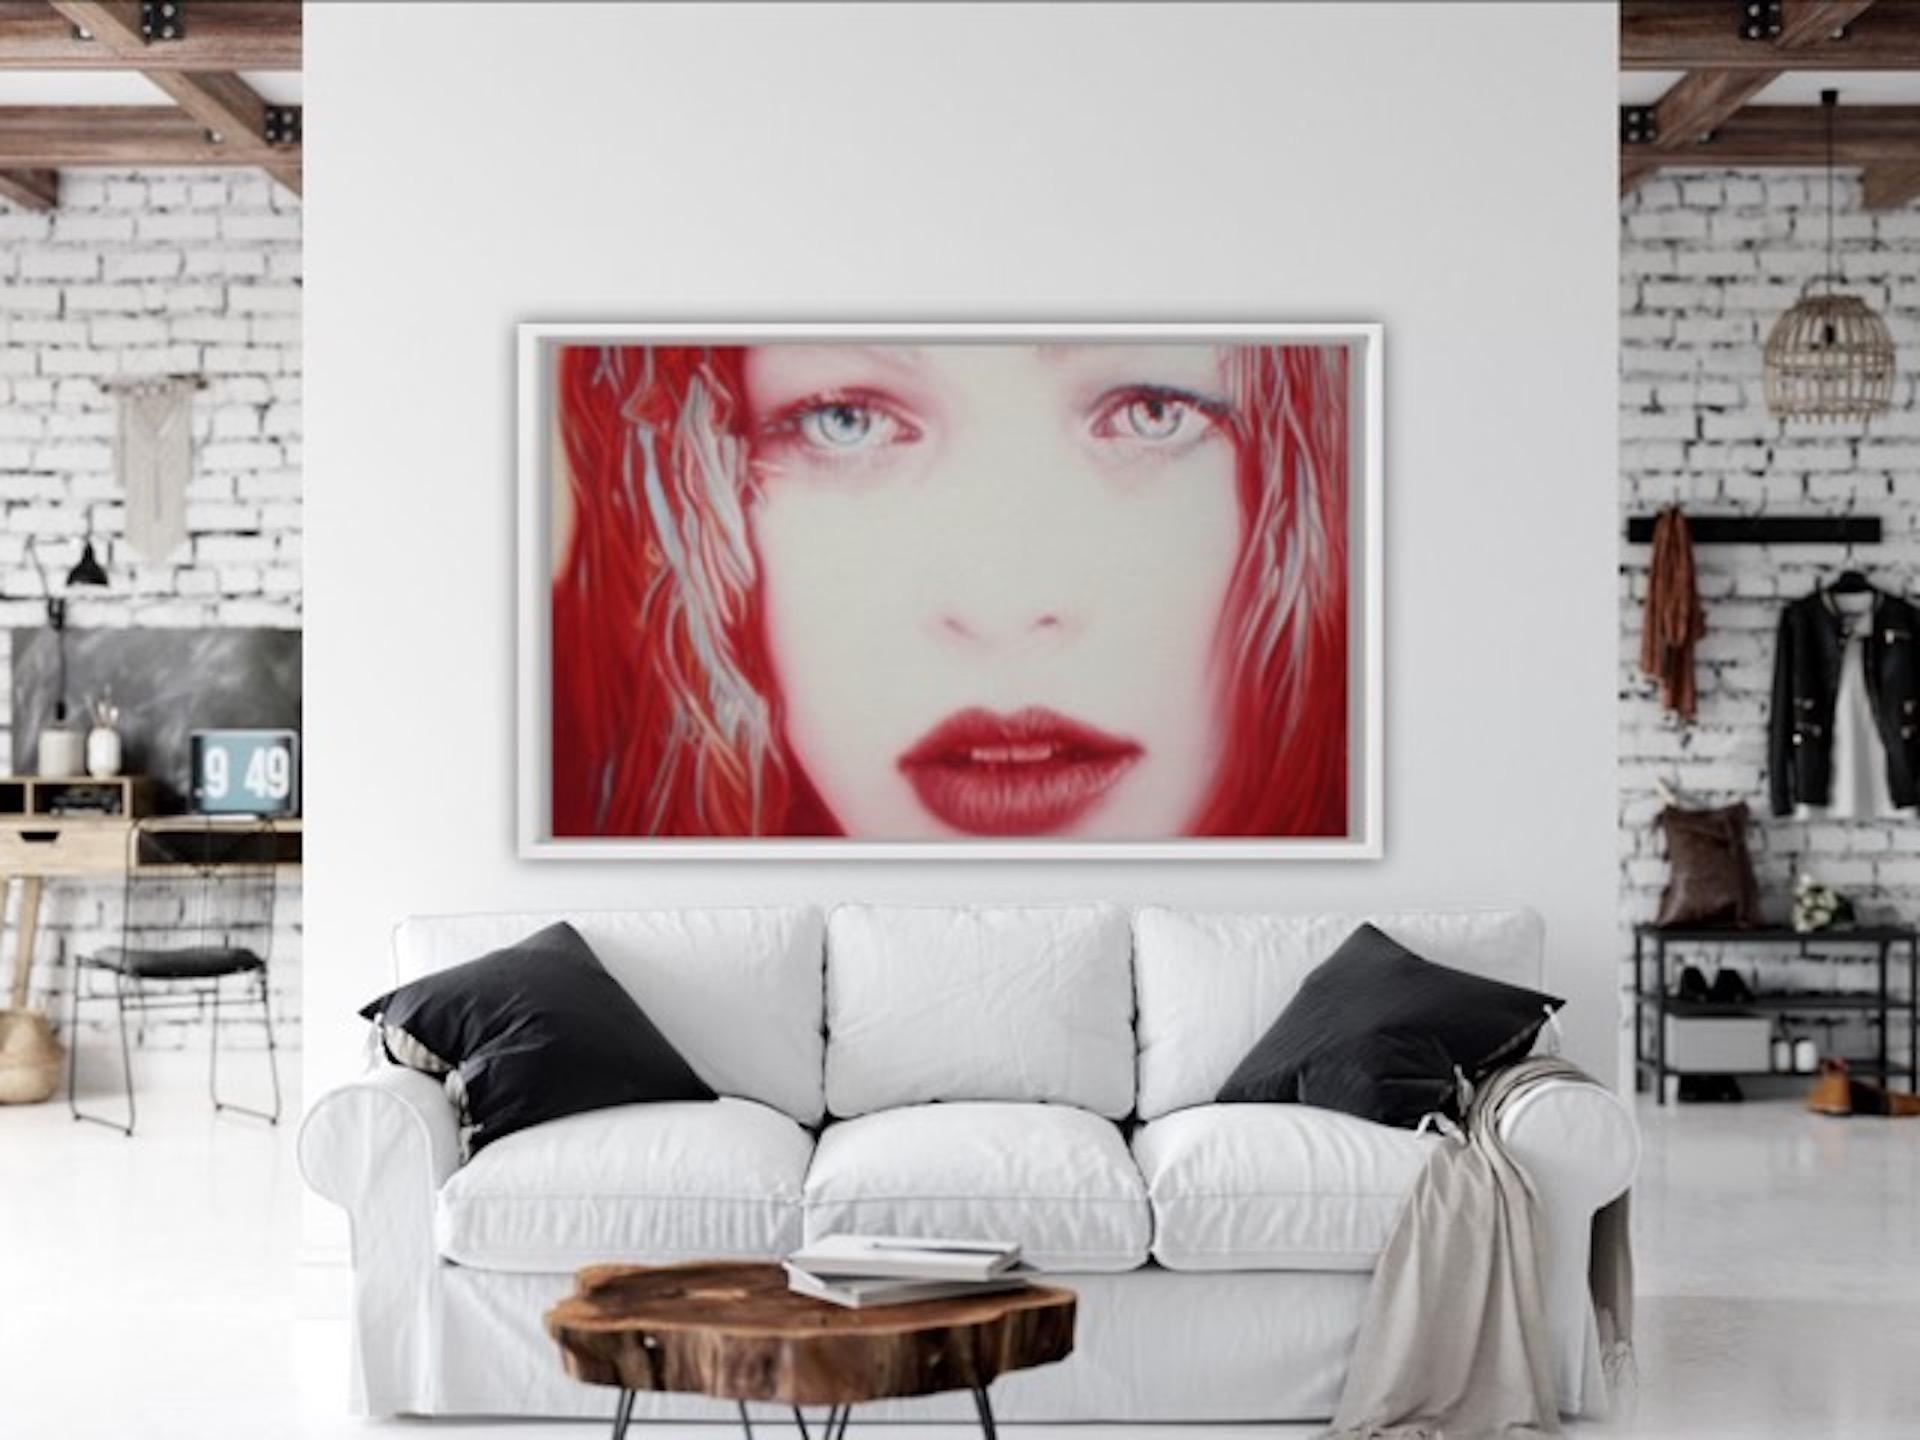 Josie McCoy.
Leeloo XV
Original Oil Painting
Oil Paint on Canvas

Leeloo XV is an original painting by Josie McCoy. This work of art is a painting of Milla Jovovich in The Fifth Element.

Josie McCoy graduated from the MA Fine Art course at Central